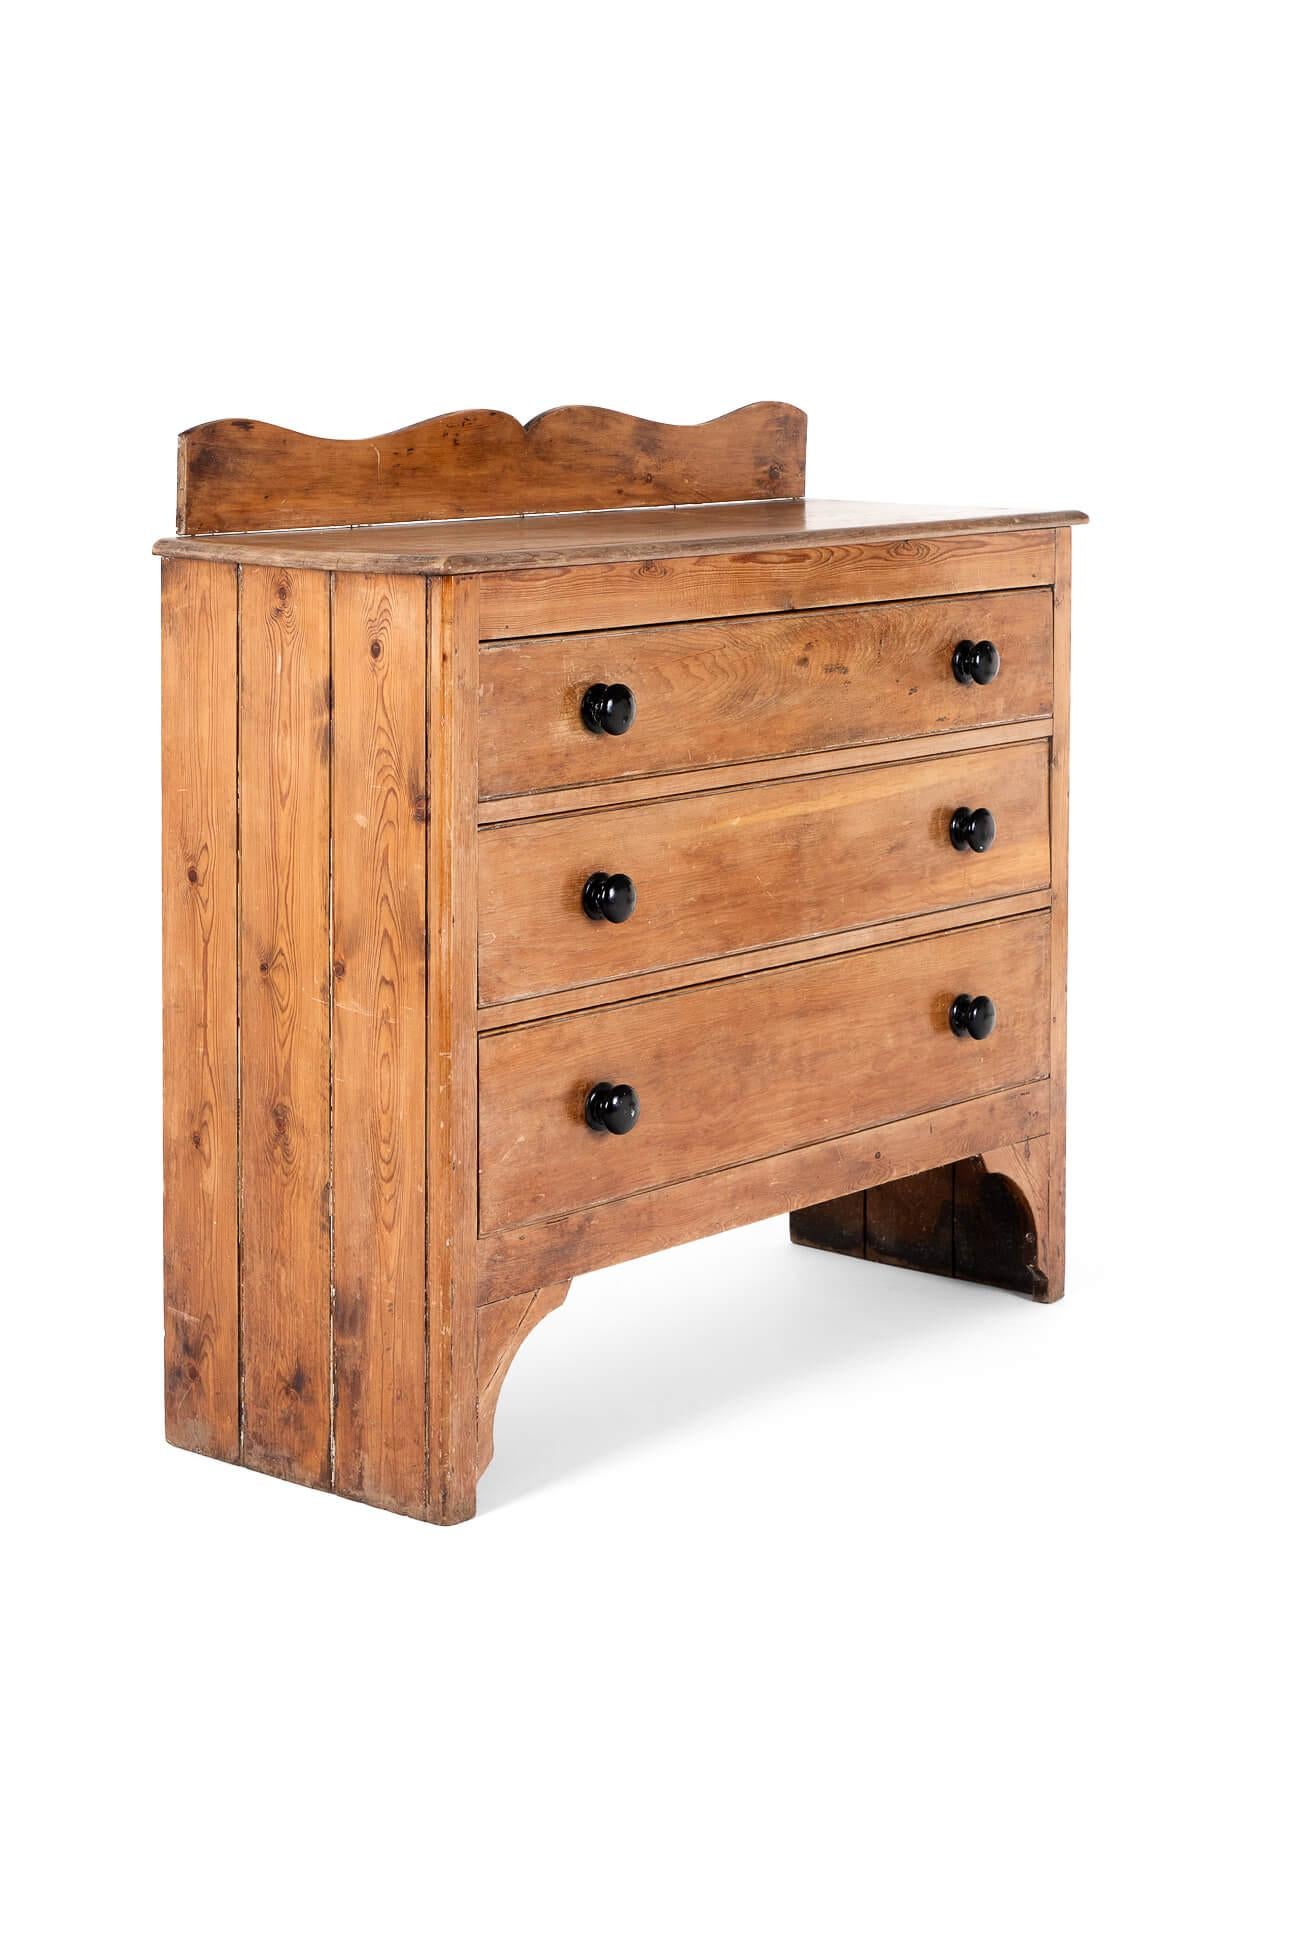 A handsome pine chest of drawers with a raised distinctly shaped upstand above a beautifully molded rectangular thick top.

The chest is raised on unusually high bracket feet arranged over three long drawers with original ebony handles.

Splendid